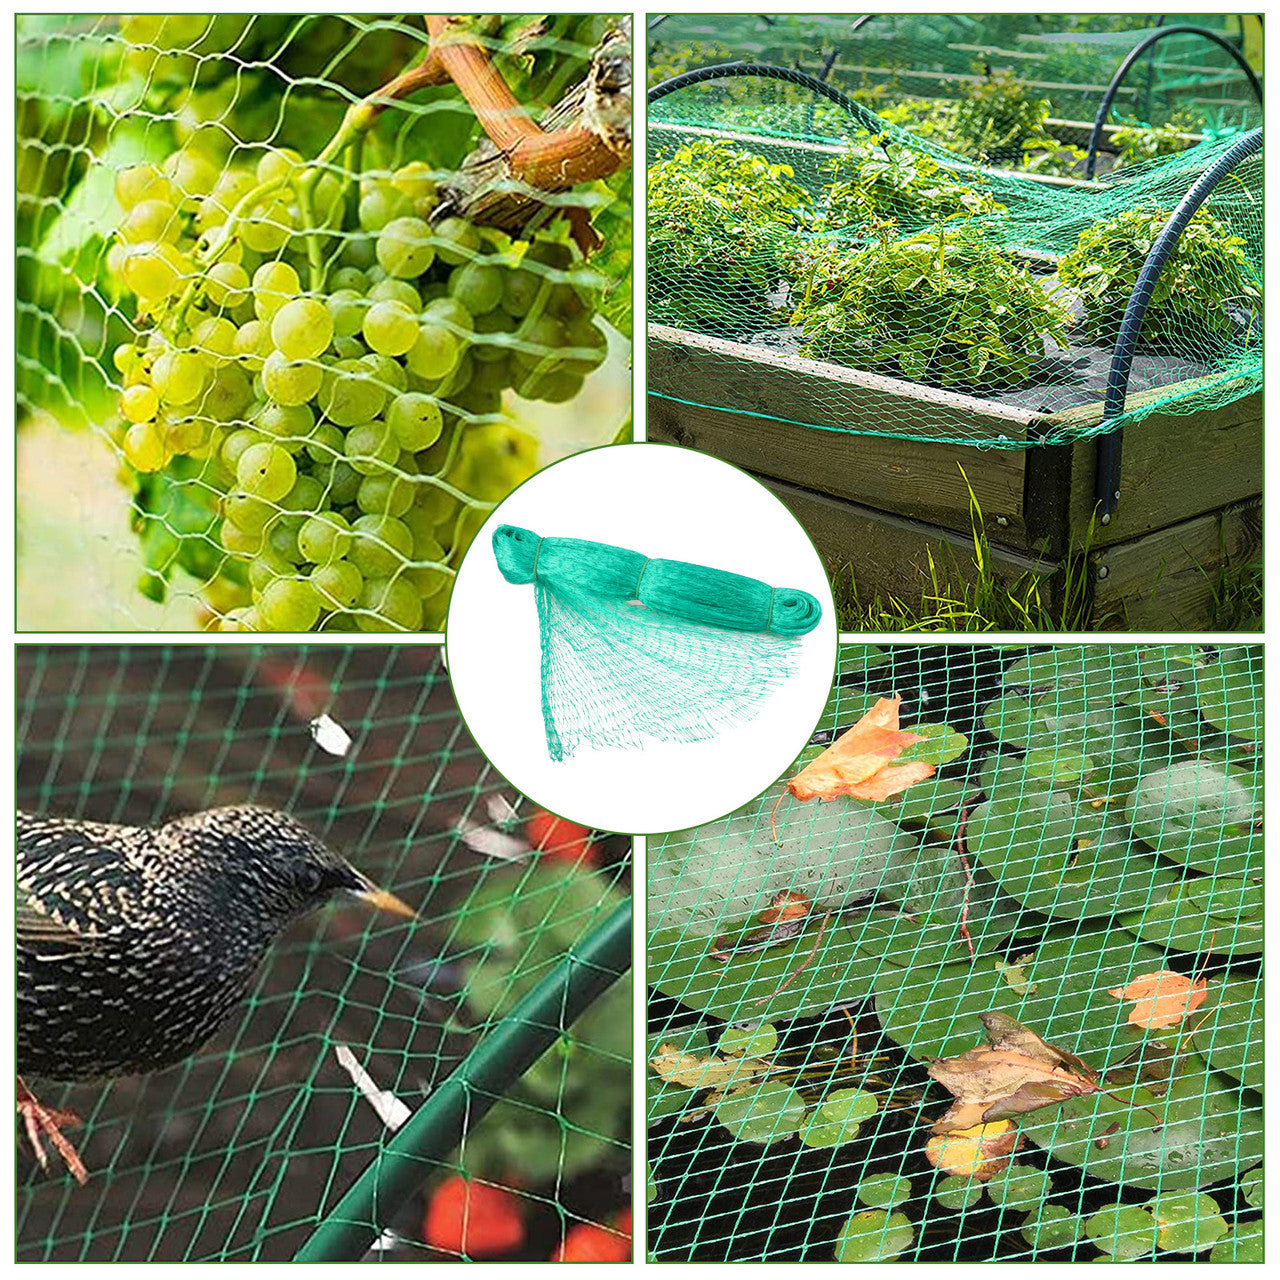 13*33ft Garden Bird Safety Prevention Net, Sturdy and Durable, Easy to Install